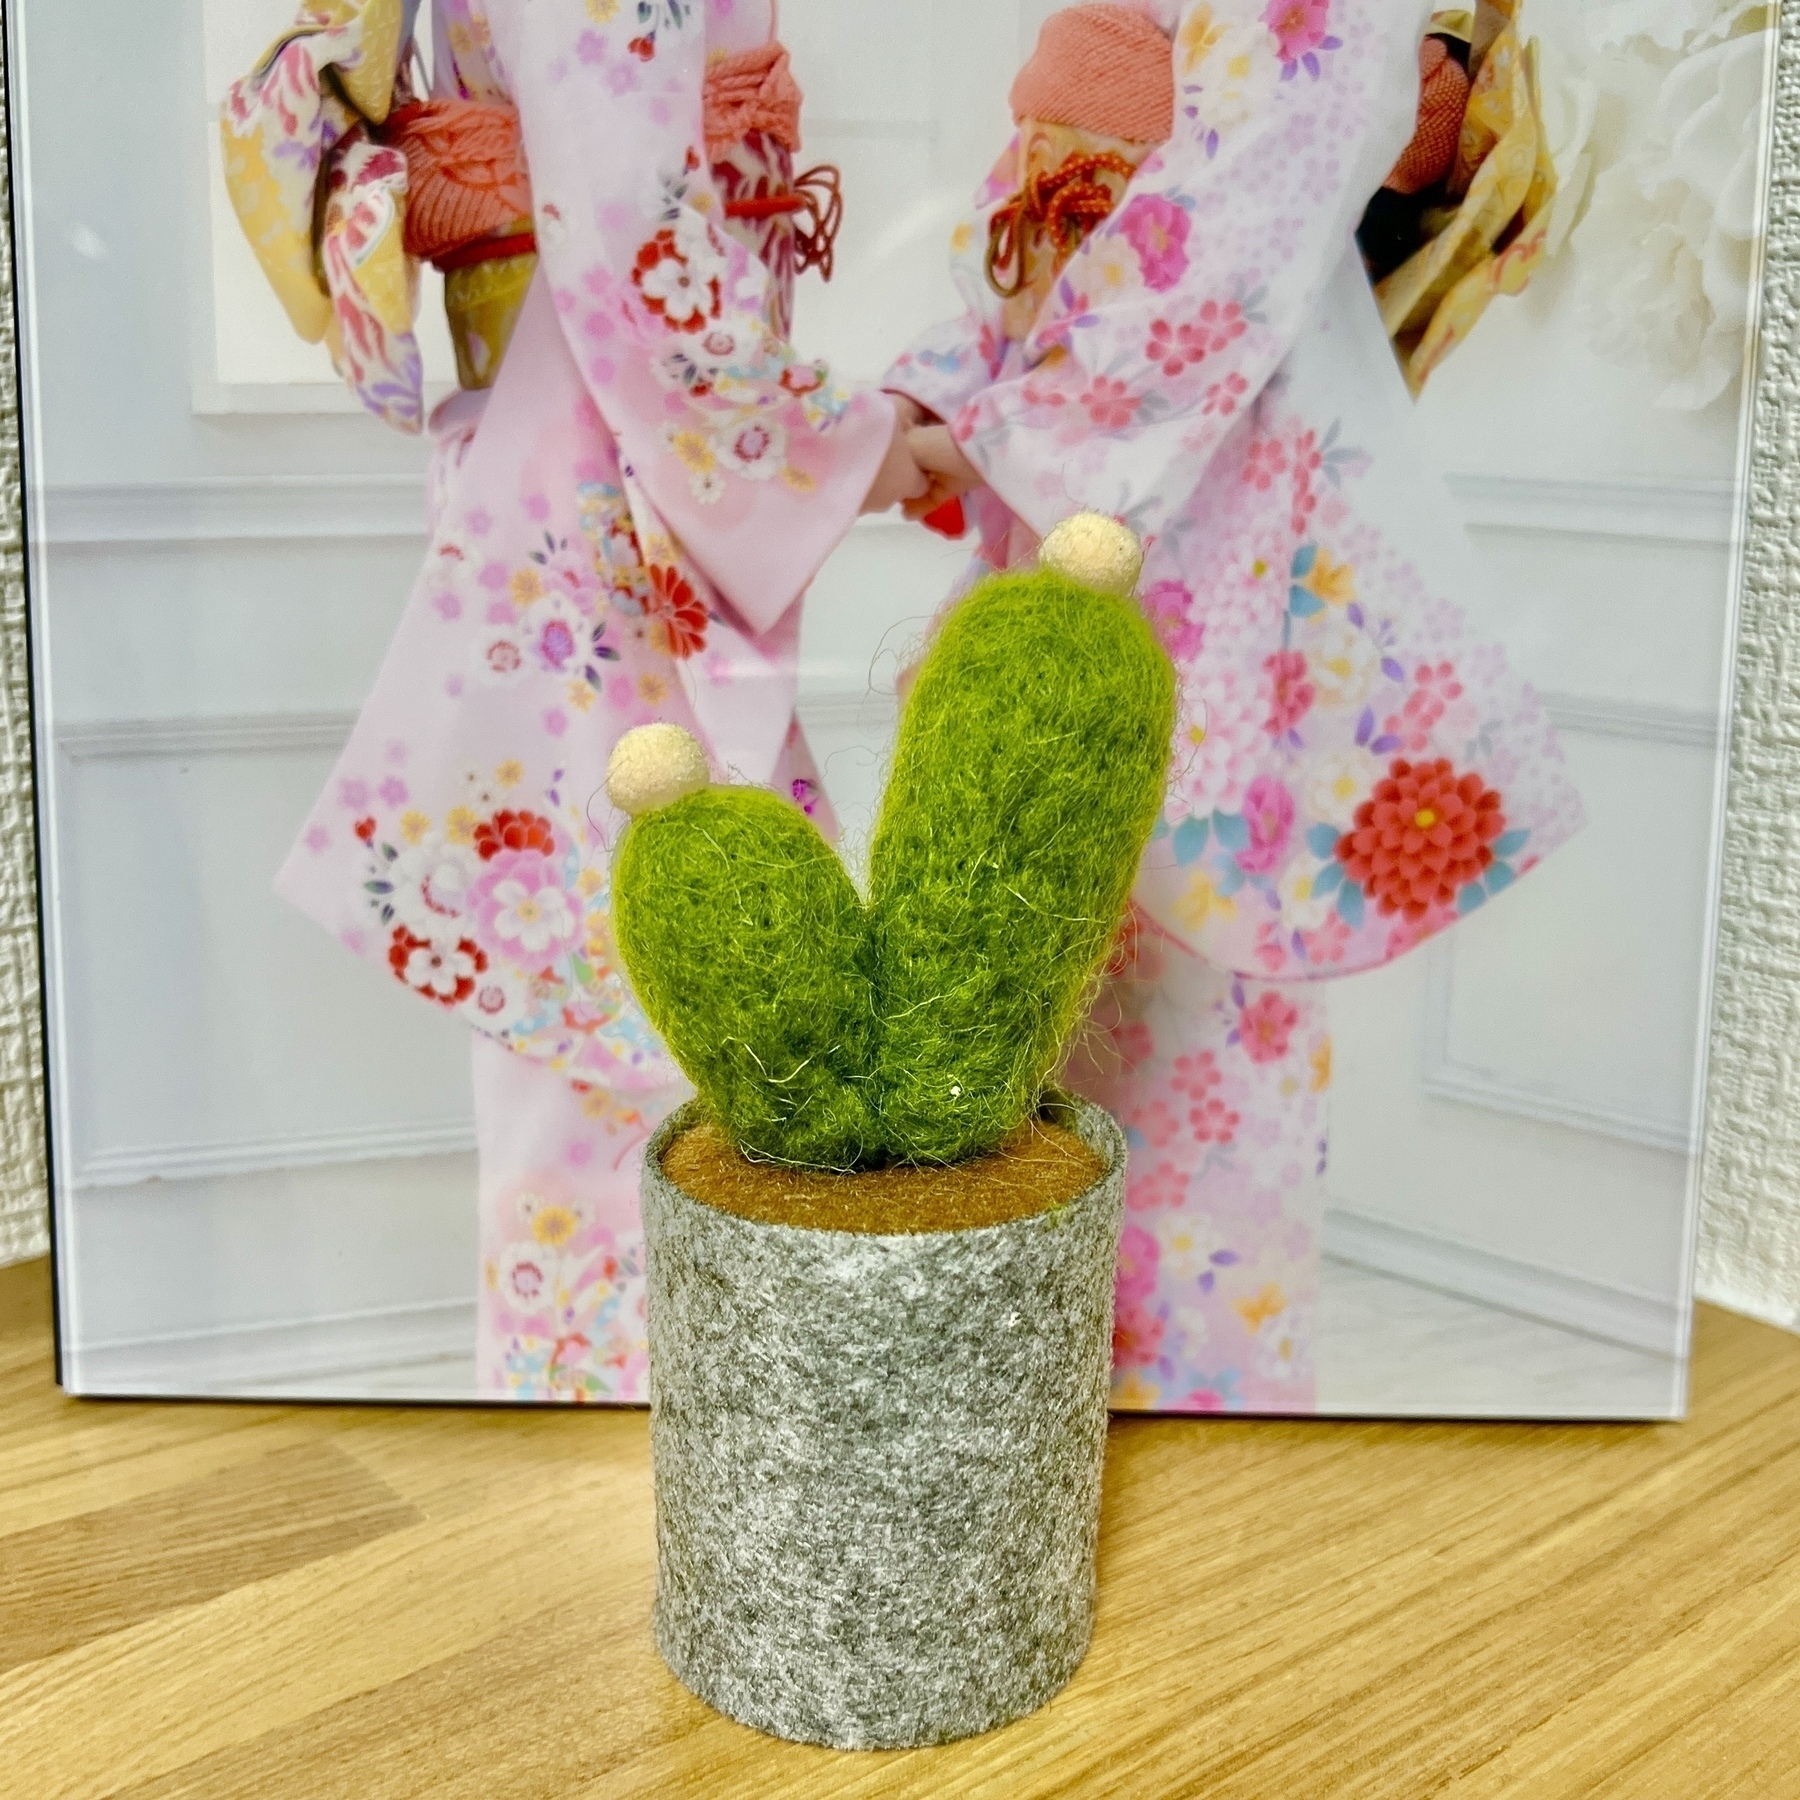 A small felt cactus in front of a photo of two girls wearing bright kimono holding hands